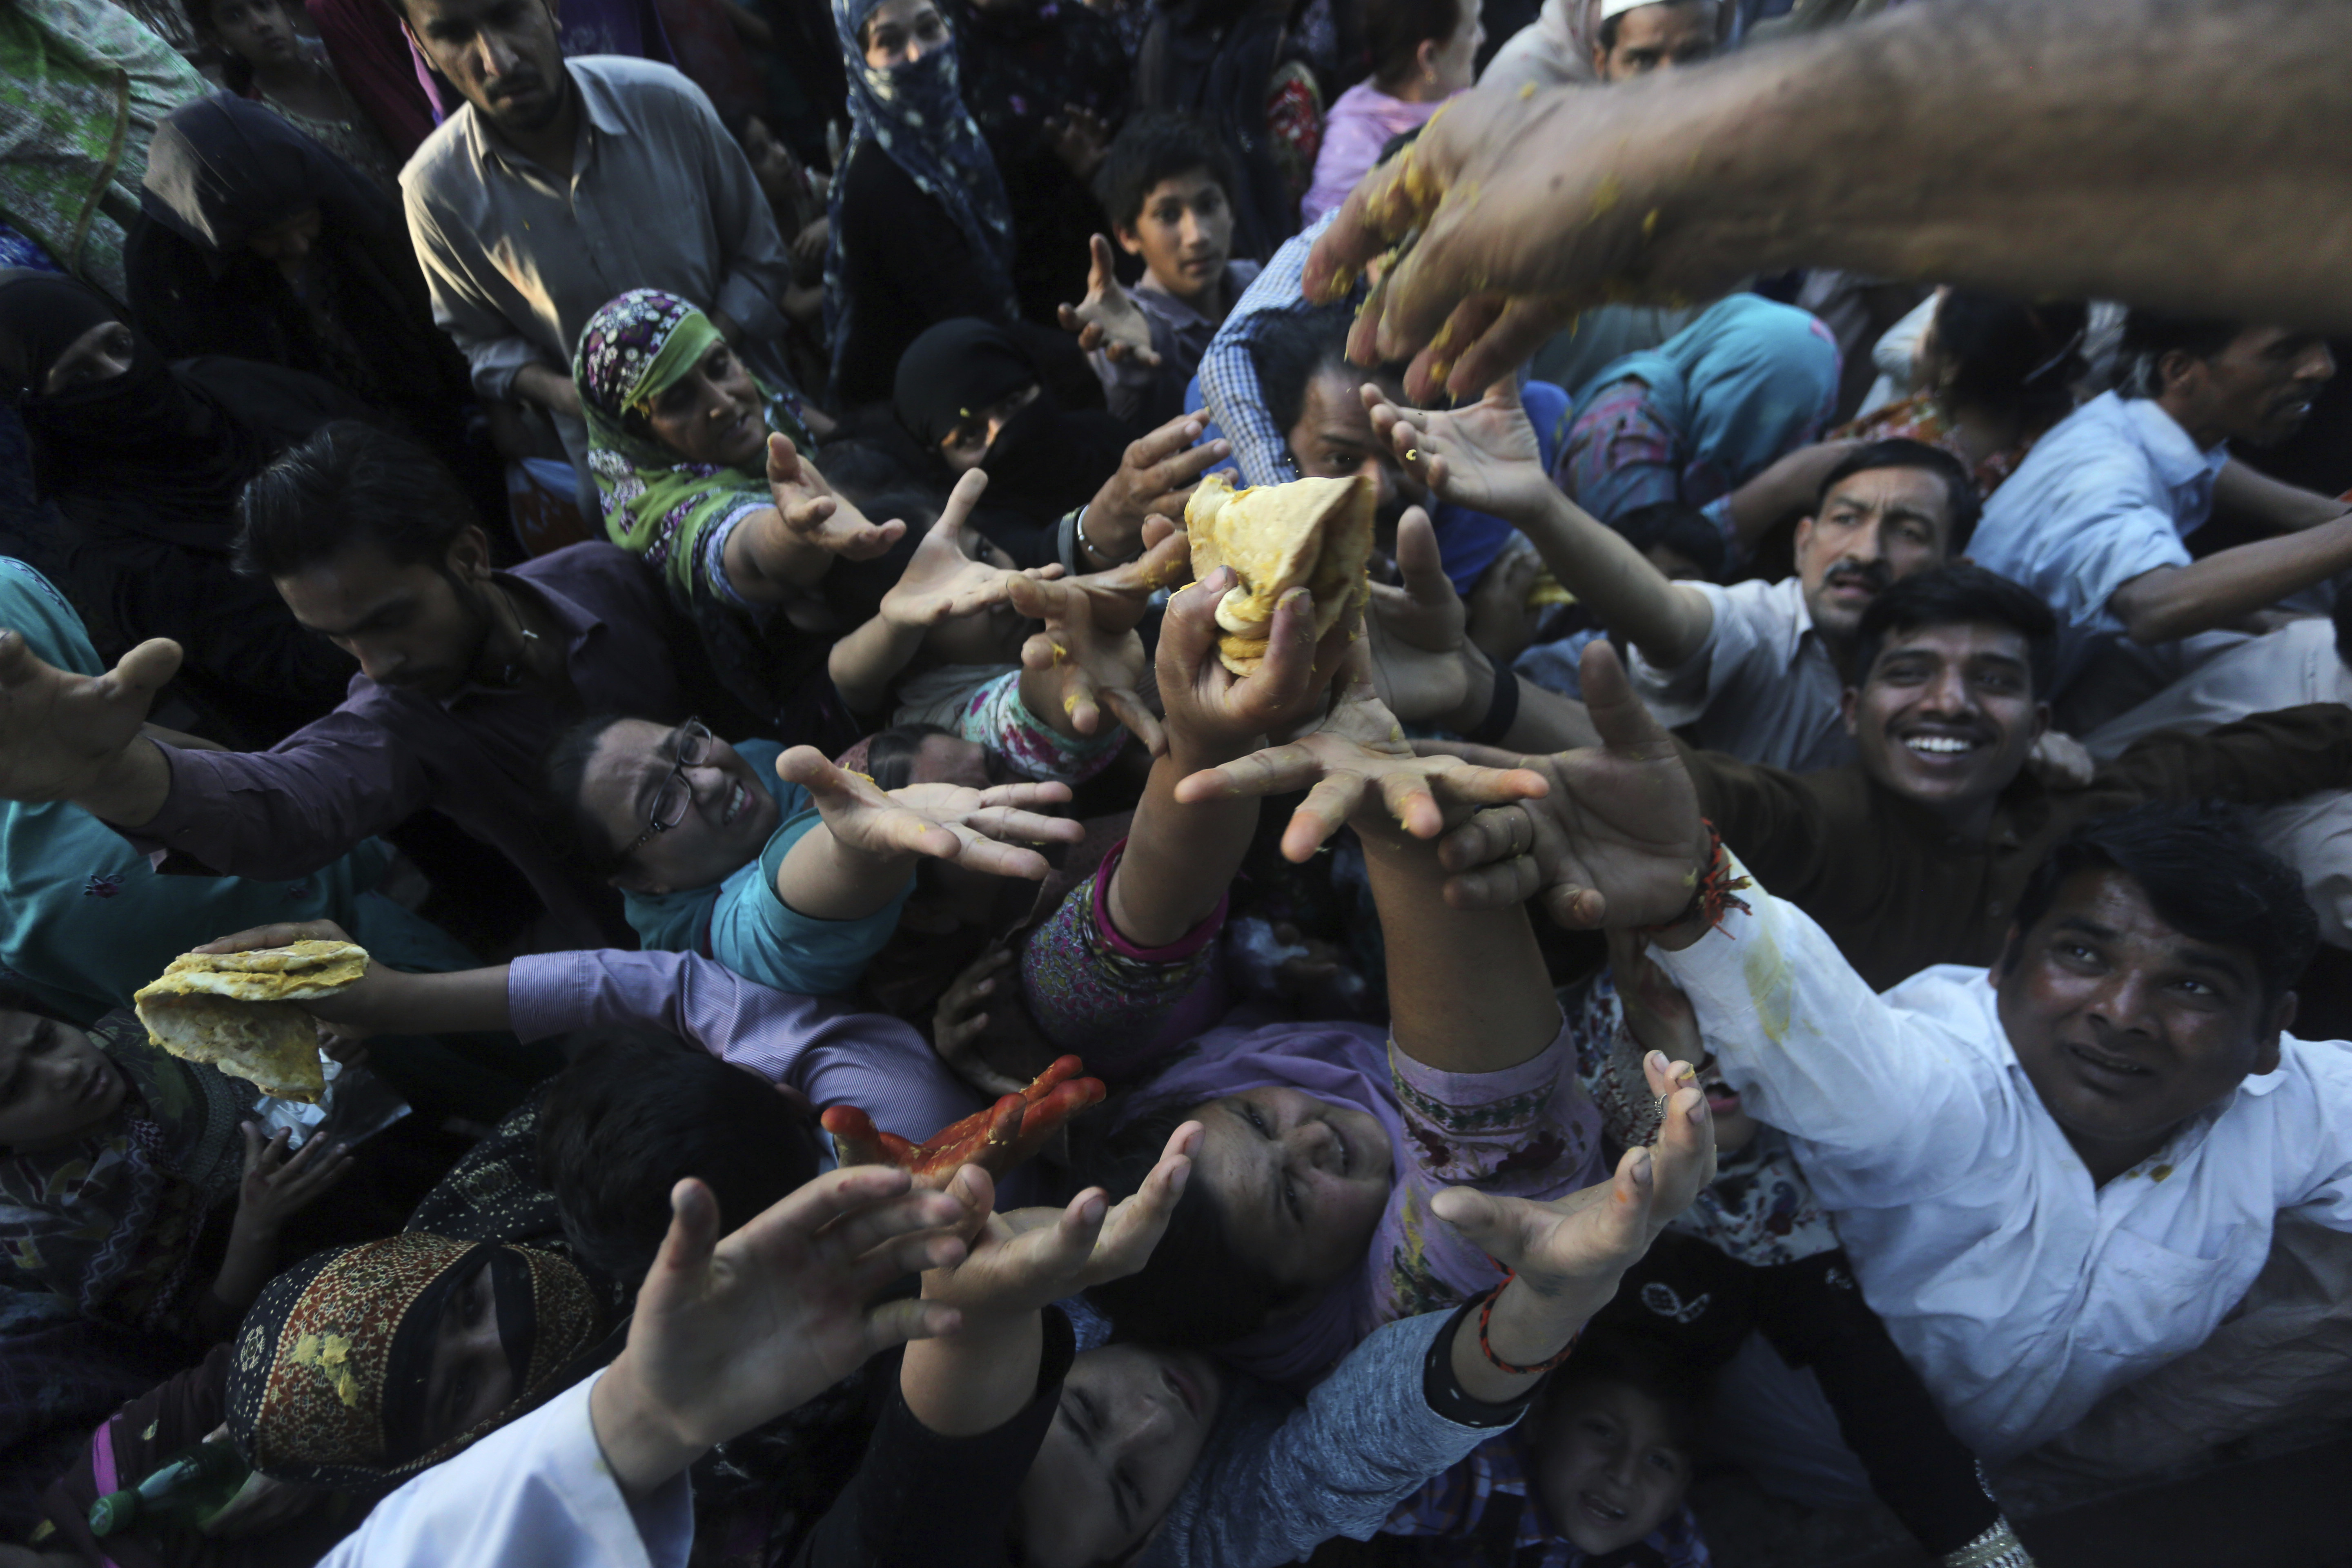 Pakistani pilgrims jostle for free food distributed at the shrine of Madhu Lal Shah Hussain, a poet also regarded as a Sufi saint, during an annual festival to celebrate him in Lahore, Pakistan, Monday, April 1, 2019. The annual festival to commemorate Shah Hussain (1538-1599) started with thousands of people expected to visit the shrine. (AP Photo/K.M Chaudary)